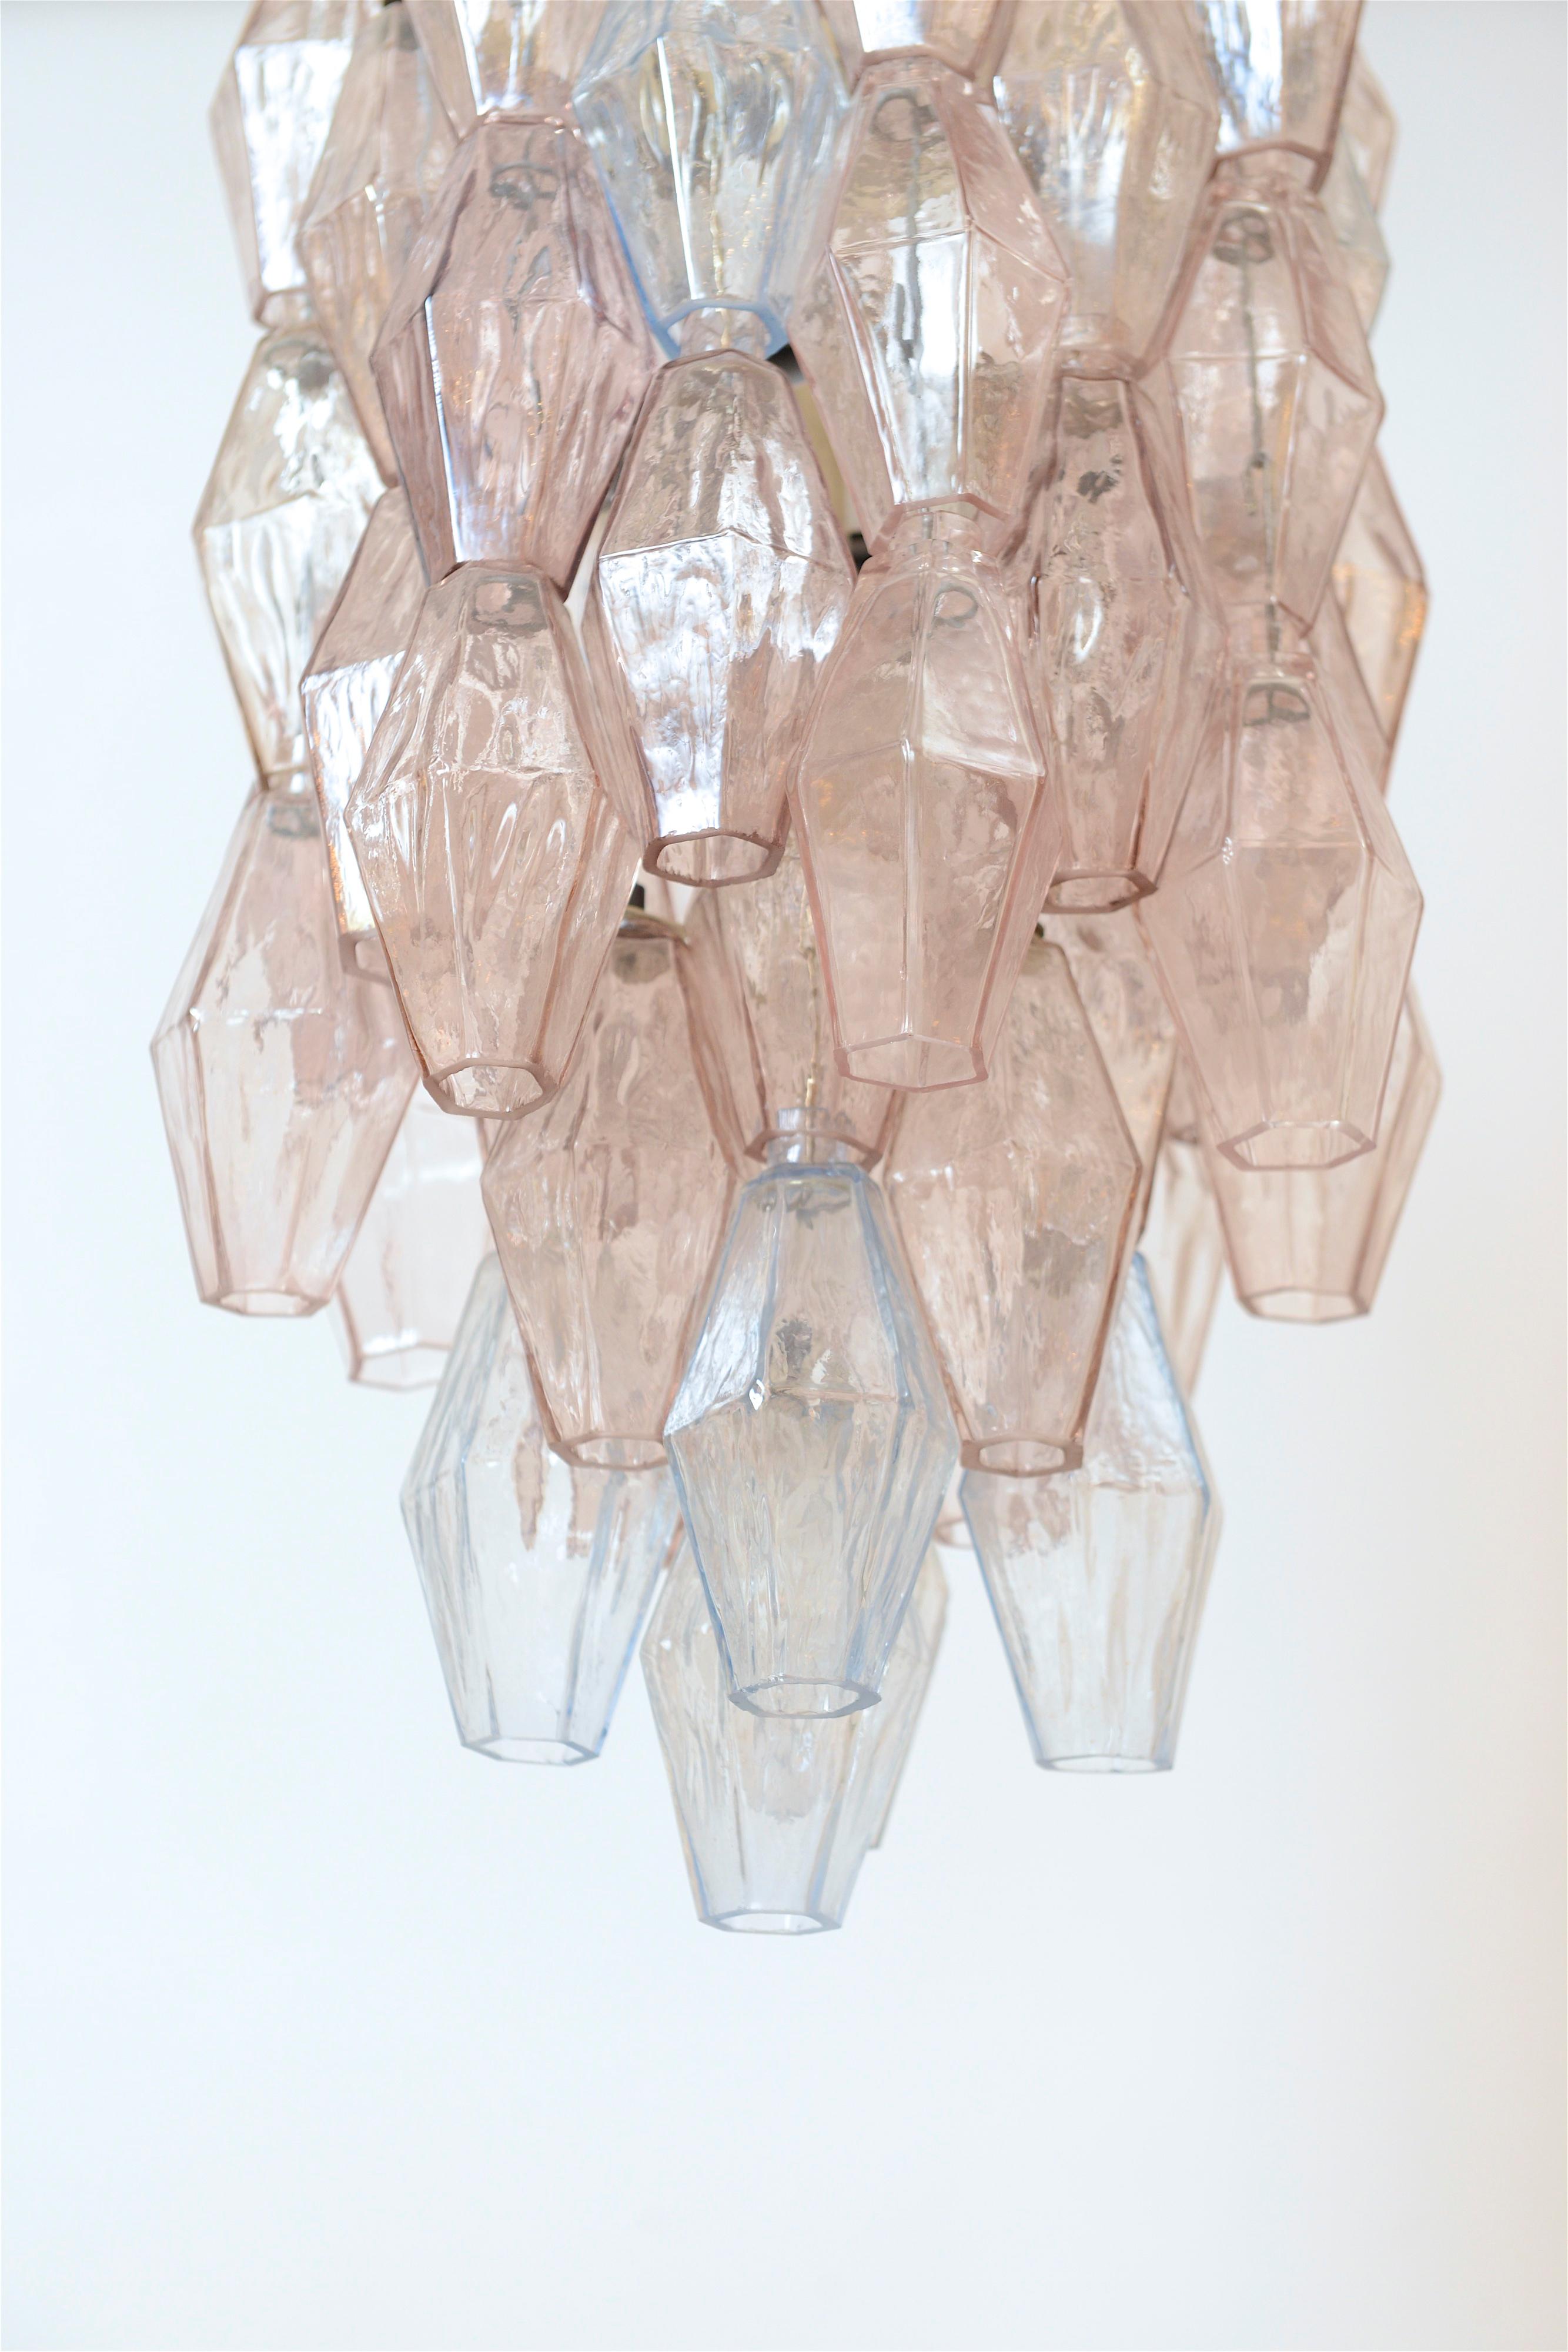 A rare ‘polyhedral’ crystal chandelier designed by architect and designer Carlo Scarpa in the late 1950s. Produced by the prestigious Muranese Company, Venini, the sixty-five hand blown poliedri consist of clear, pink and blue colored crystals, each